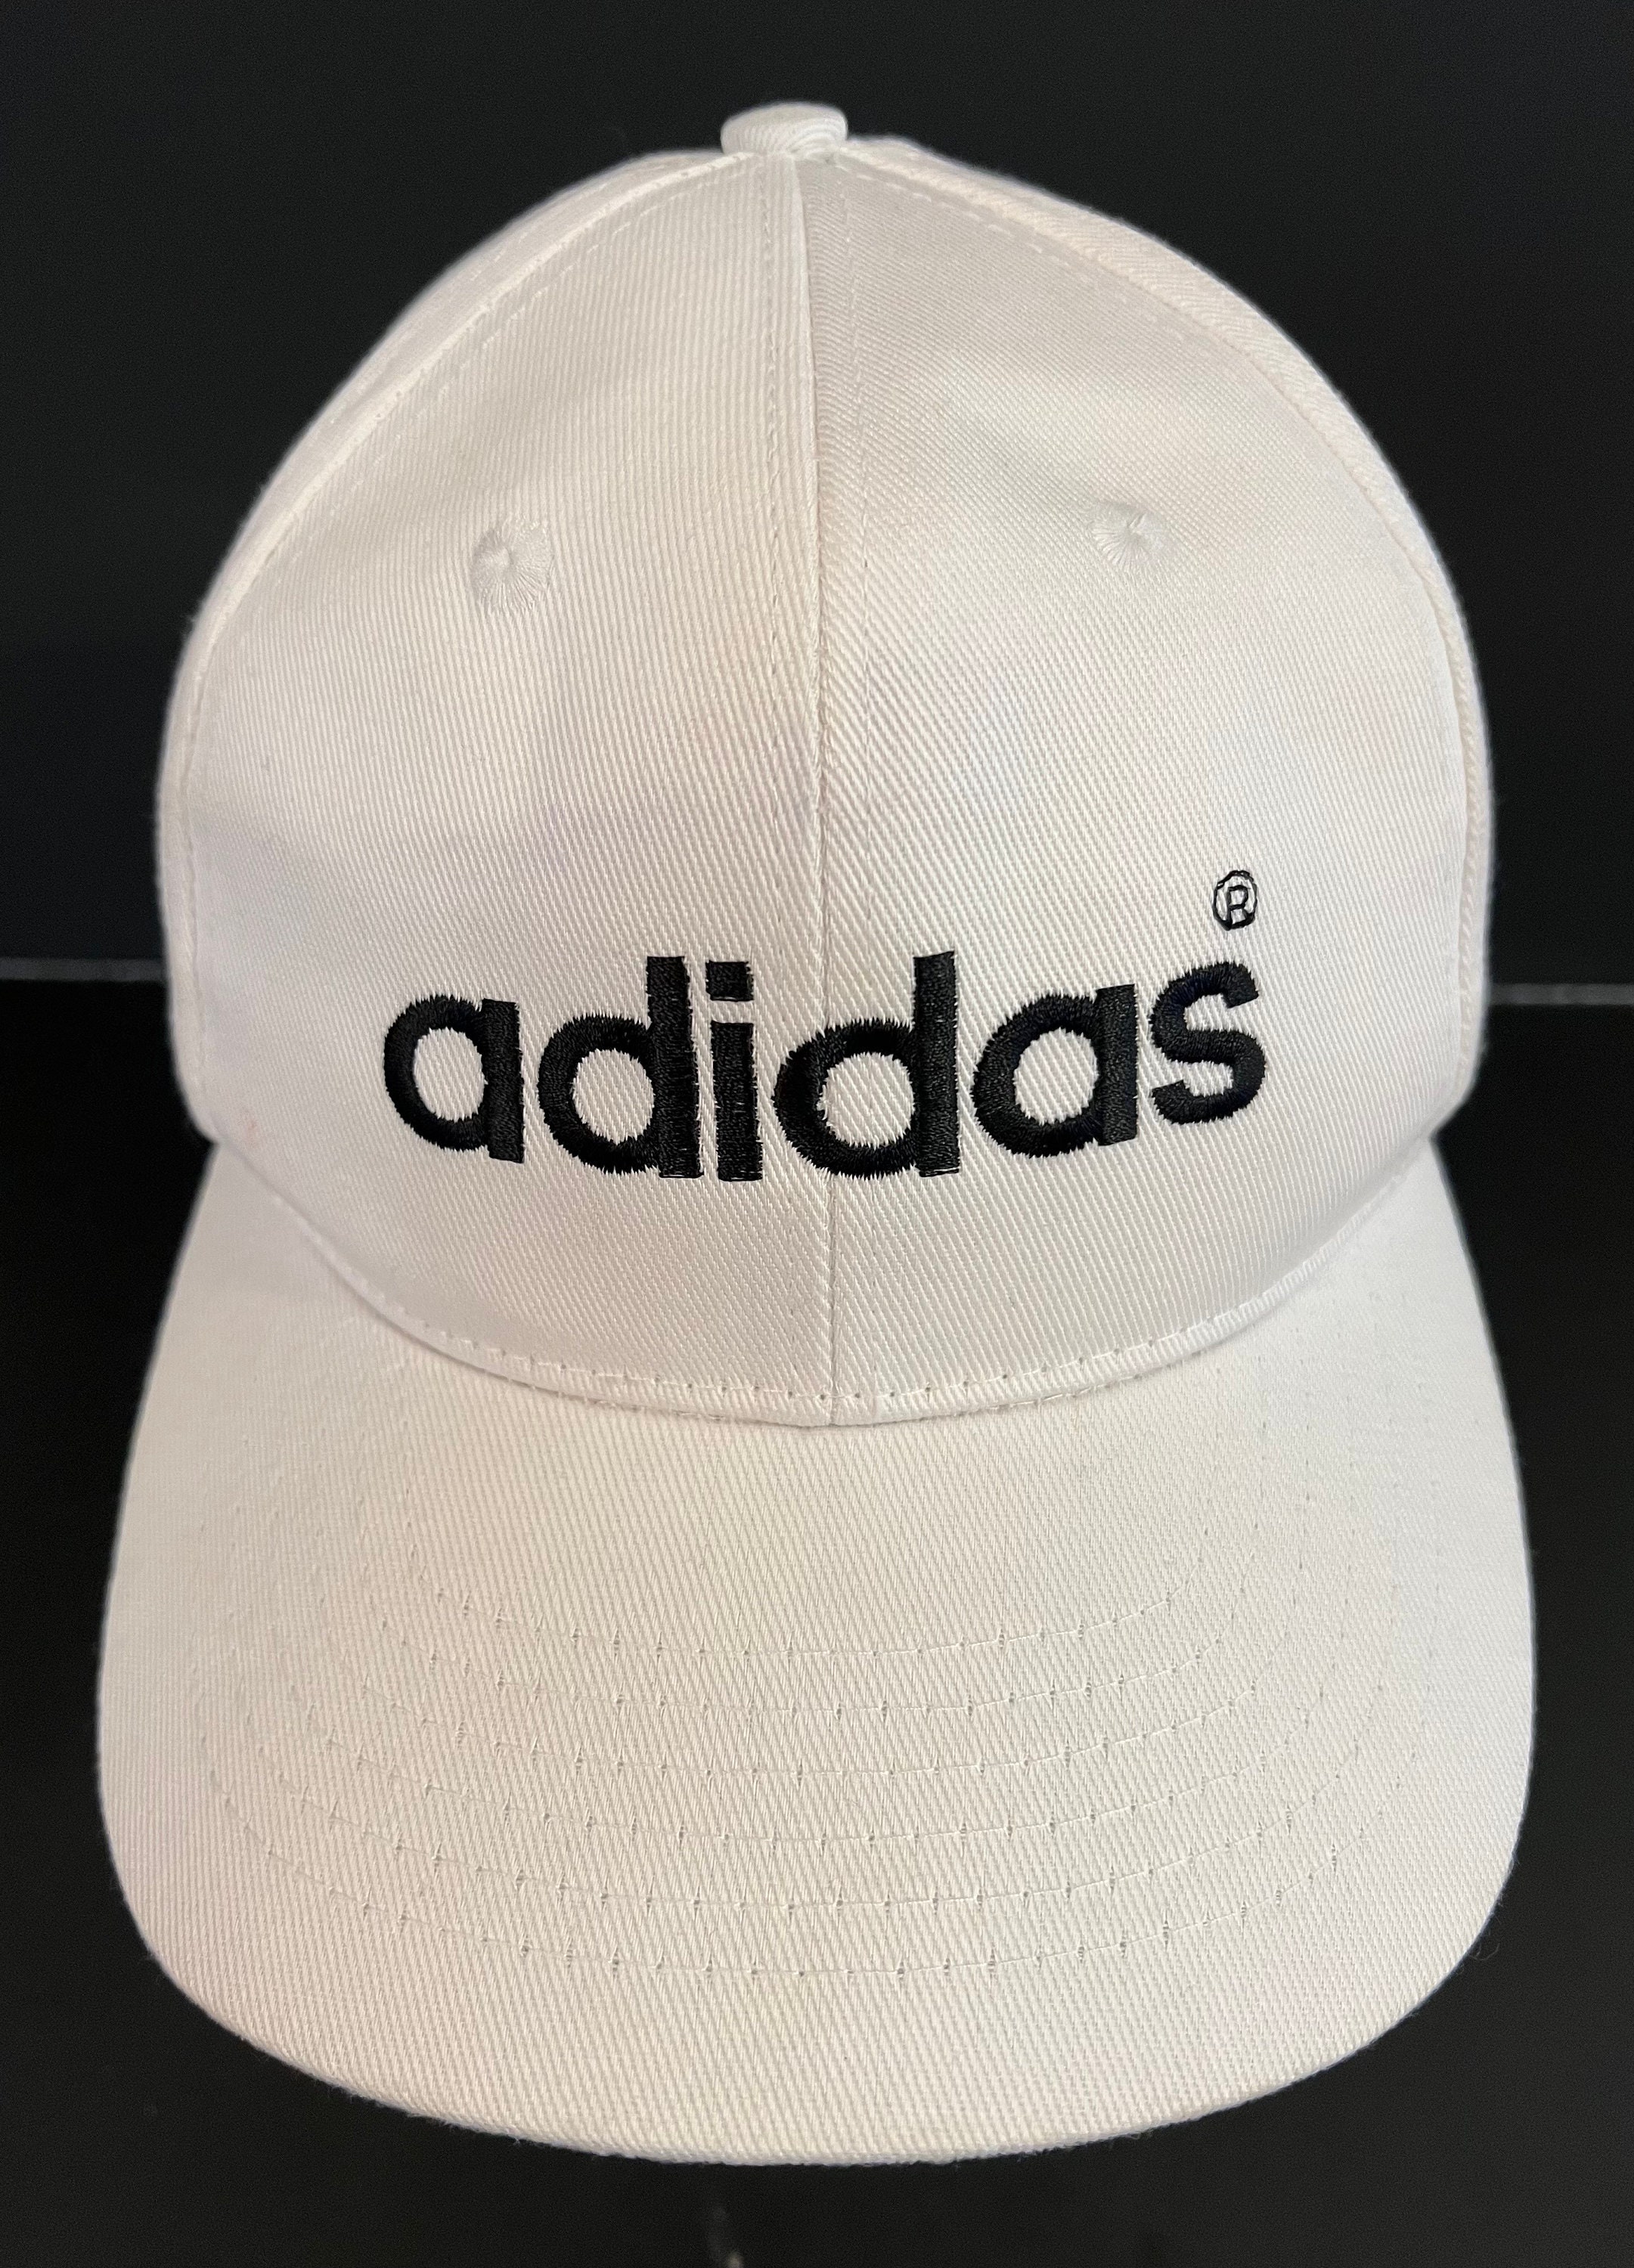 Vintage Rangers F.C. Adidas Snapback Hat – For All To Envy